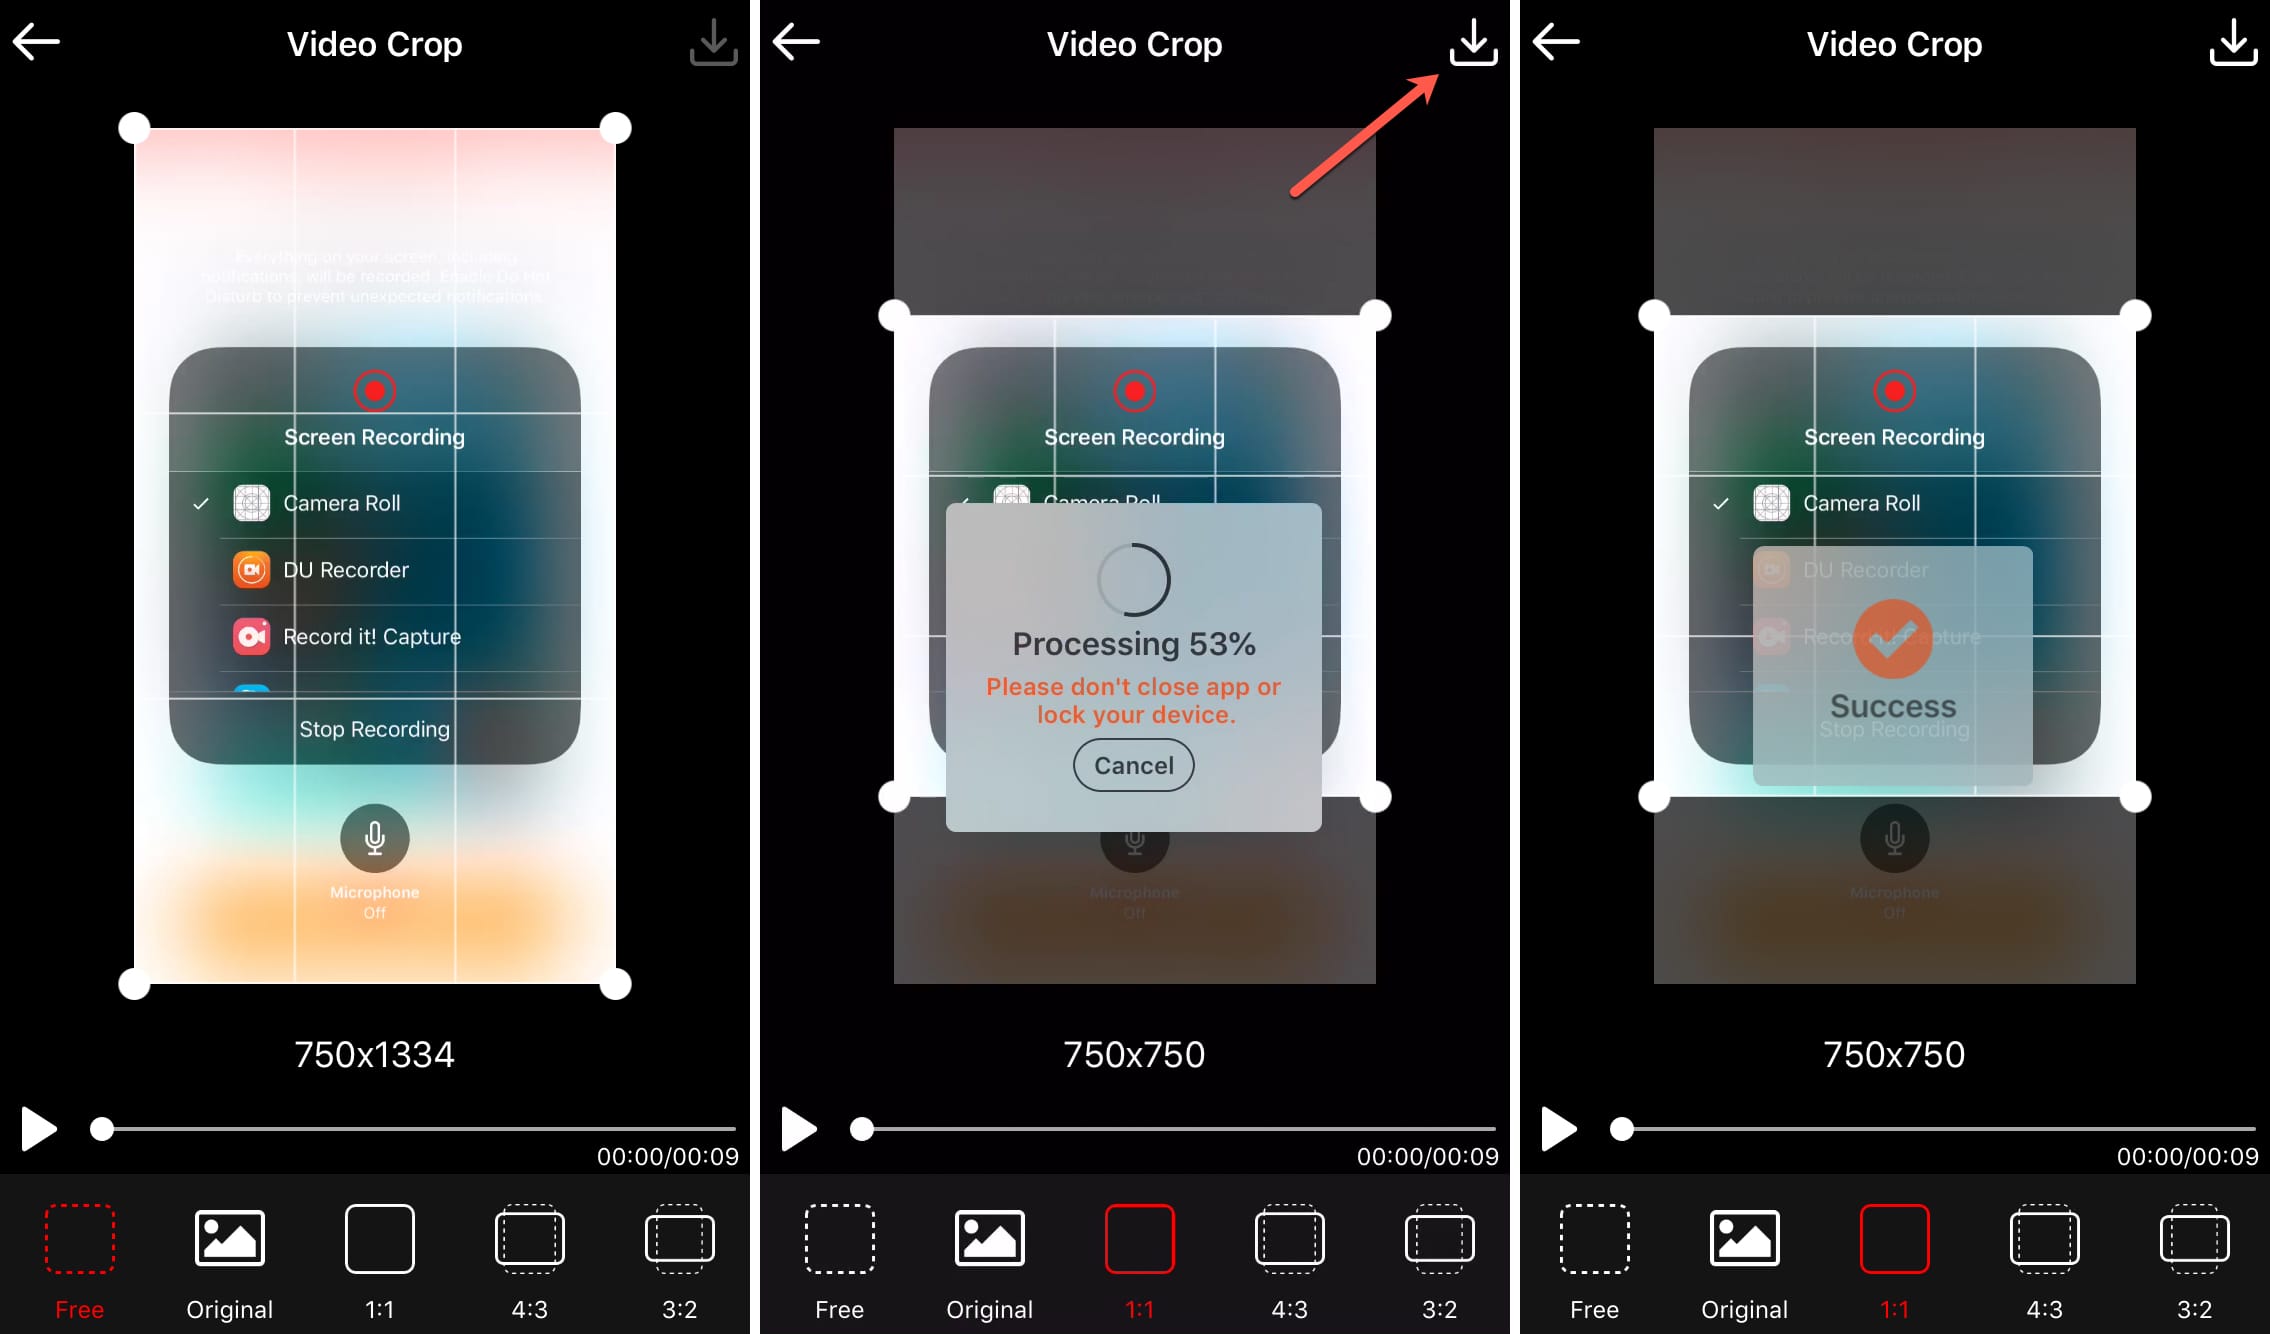 How to crop videos on iPhone with iMovie and Video Crop ...